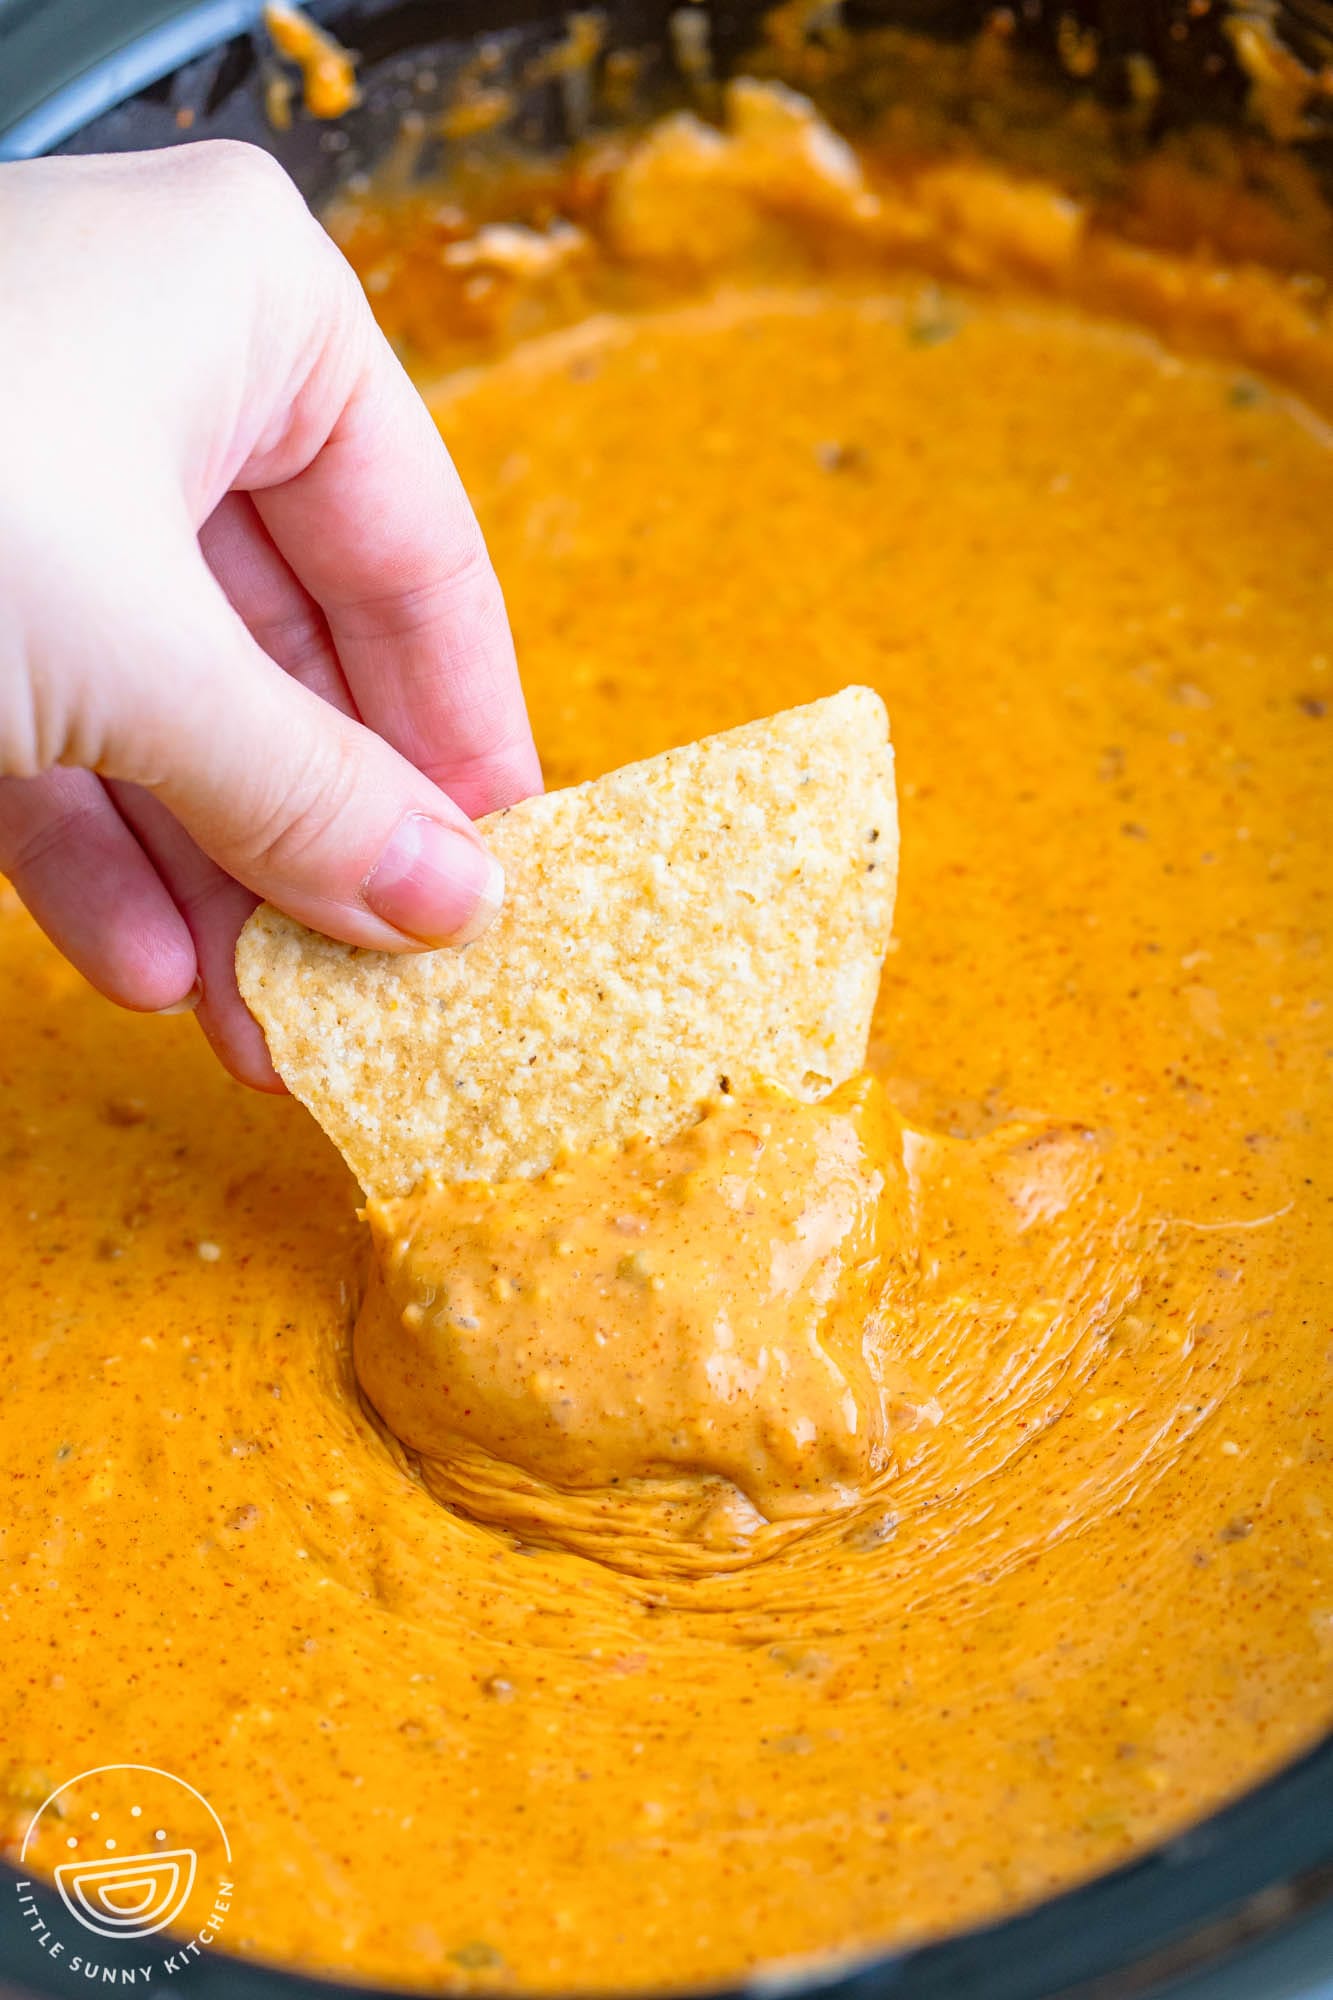 a hand dipping a tortilla chip into a crock pot filled with queso dip.